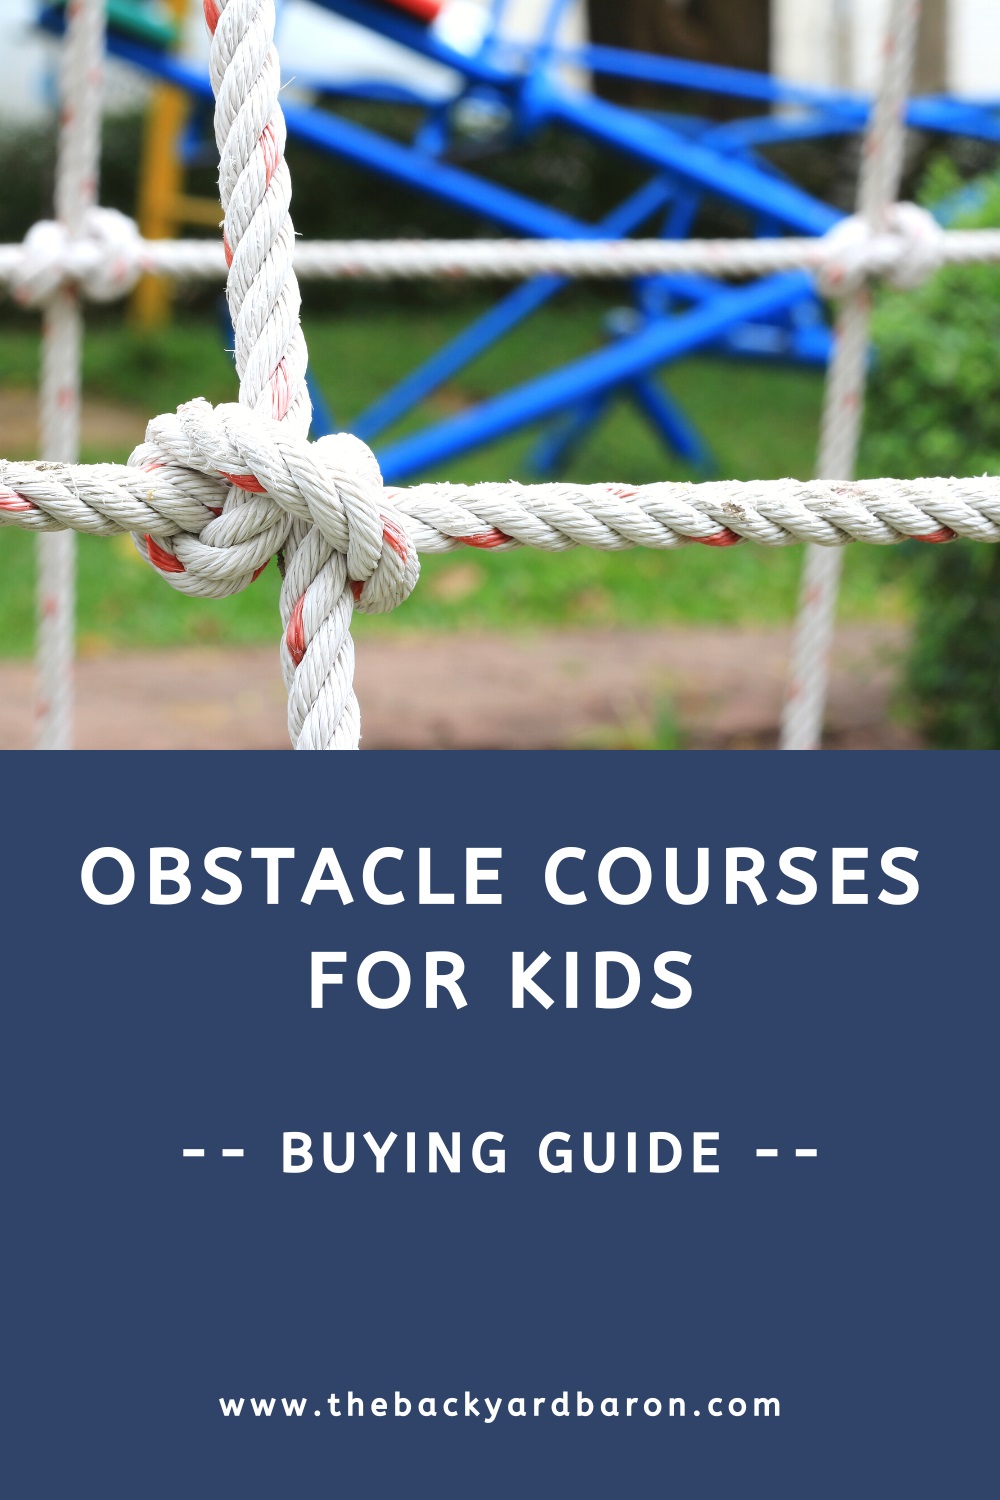 Backyard obstacle course kit buying guide